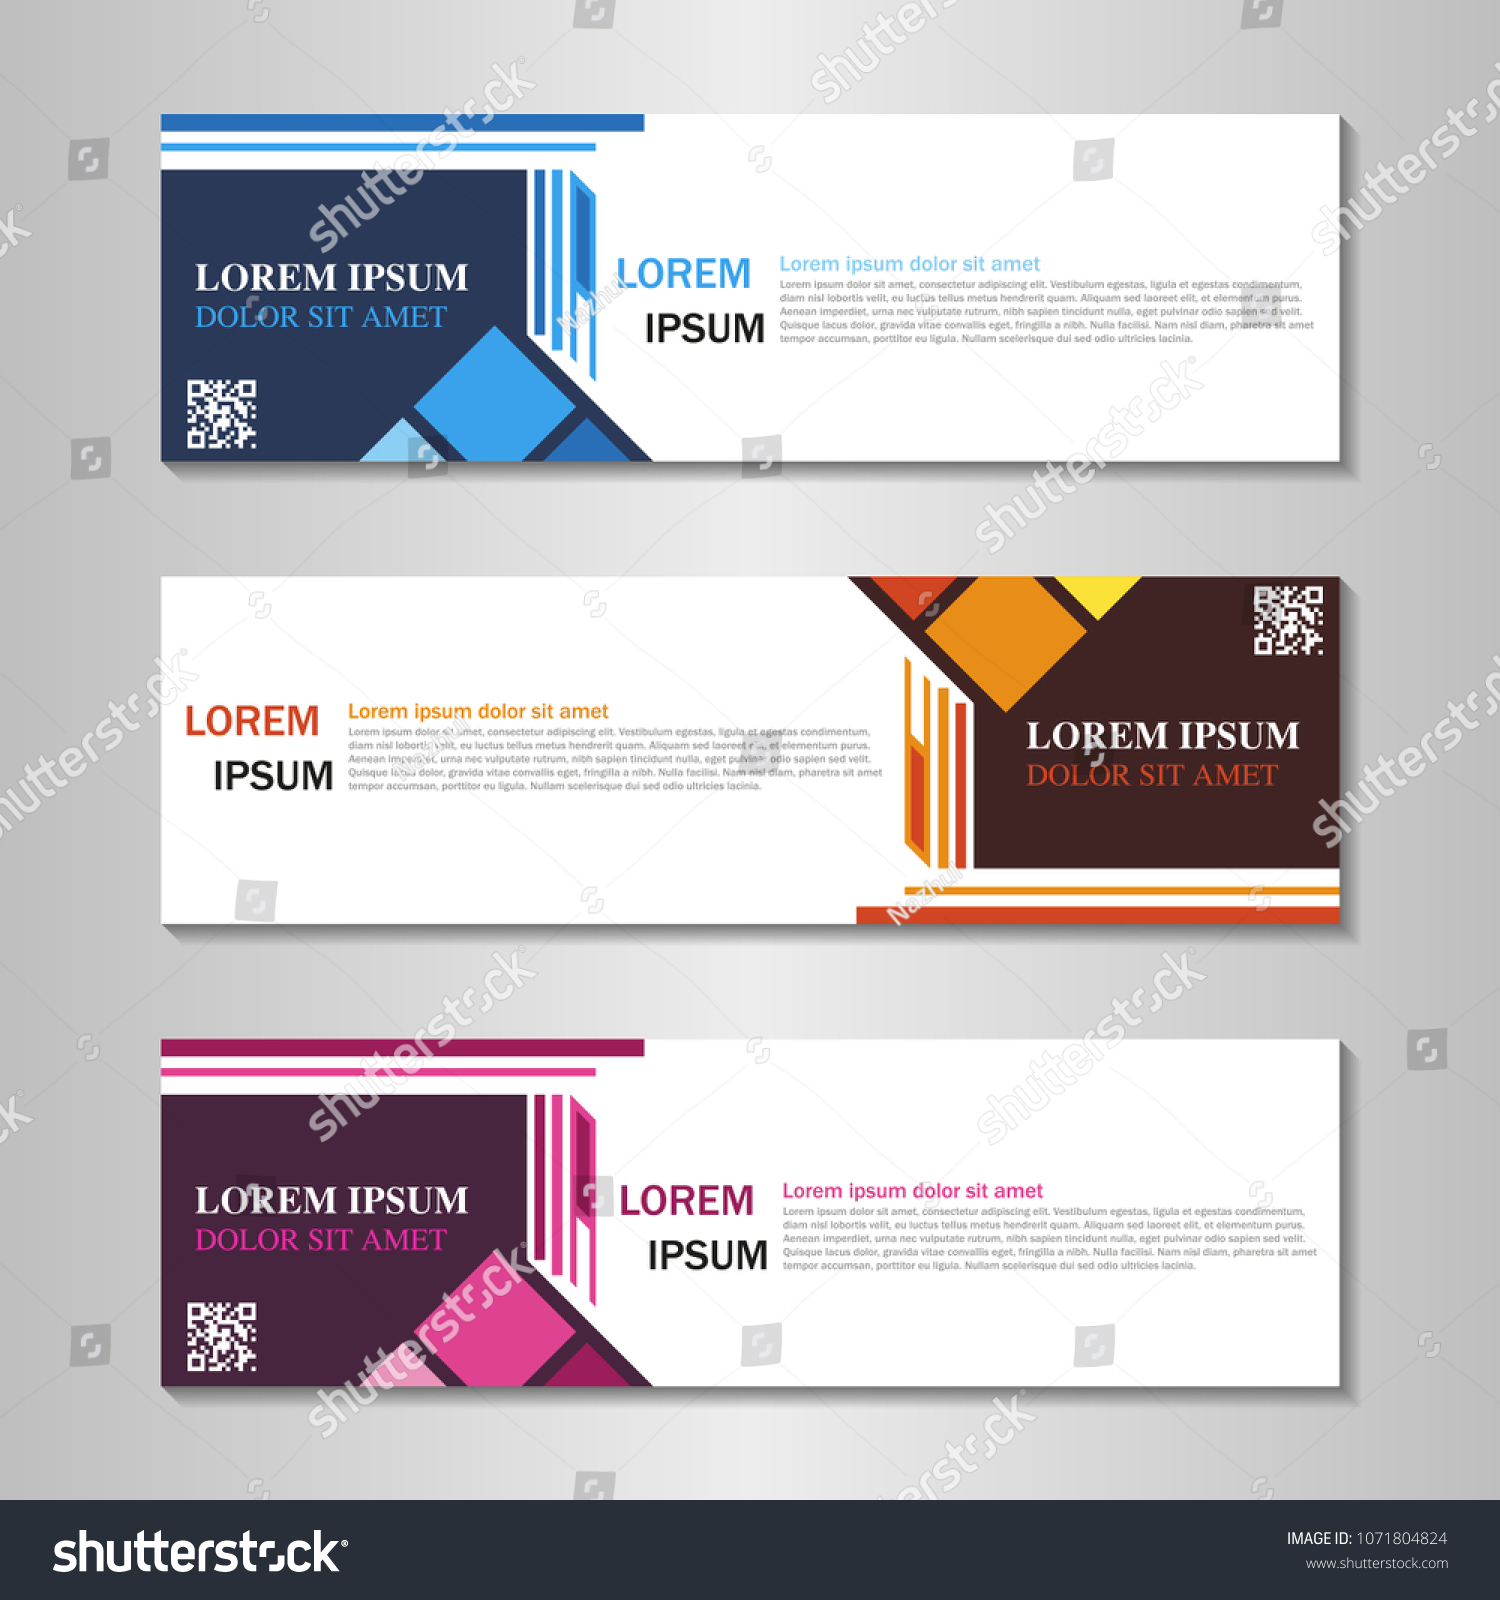 collection of web banner design template. #1071804824